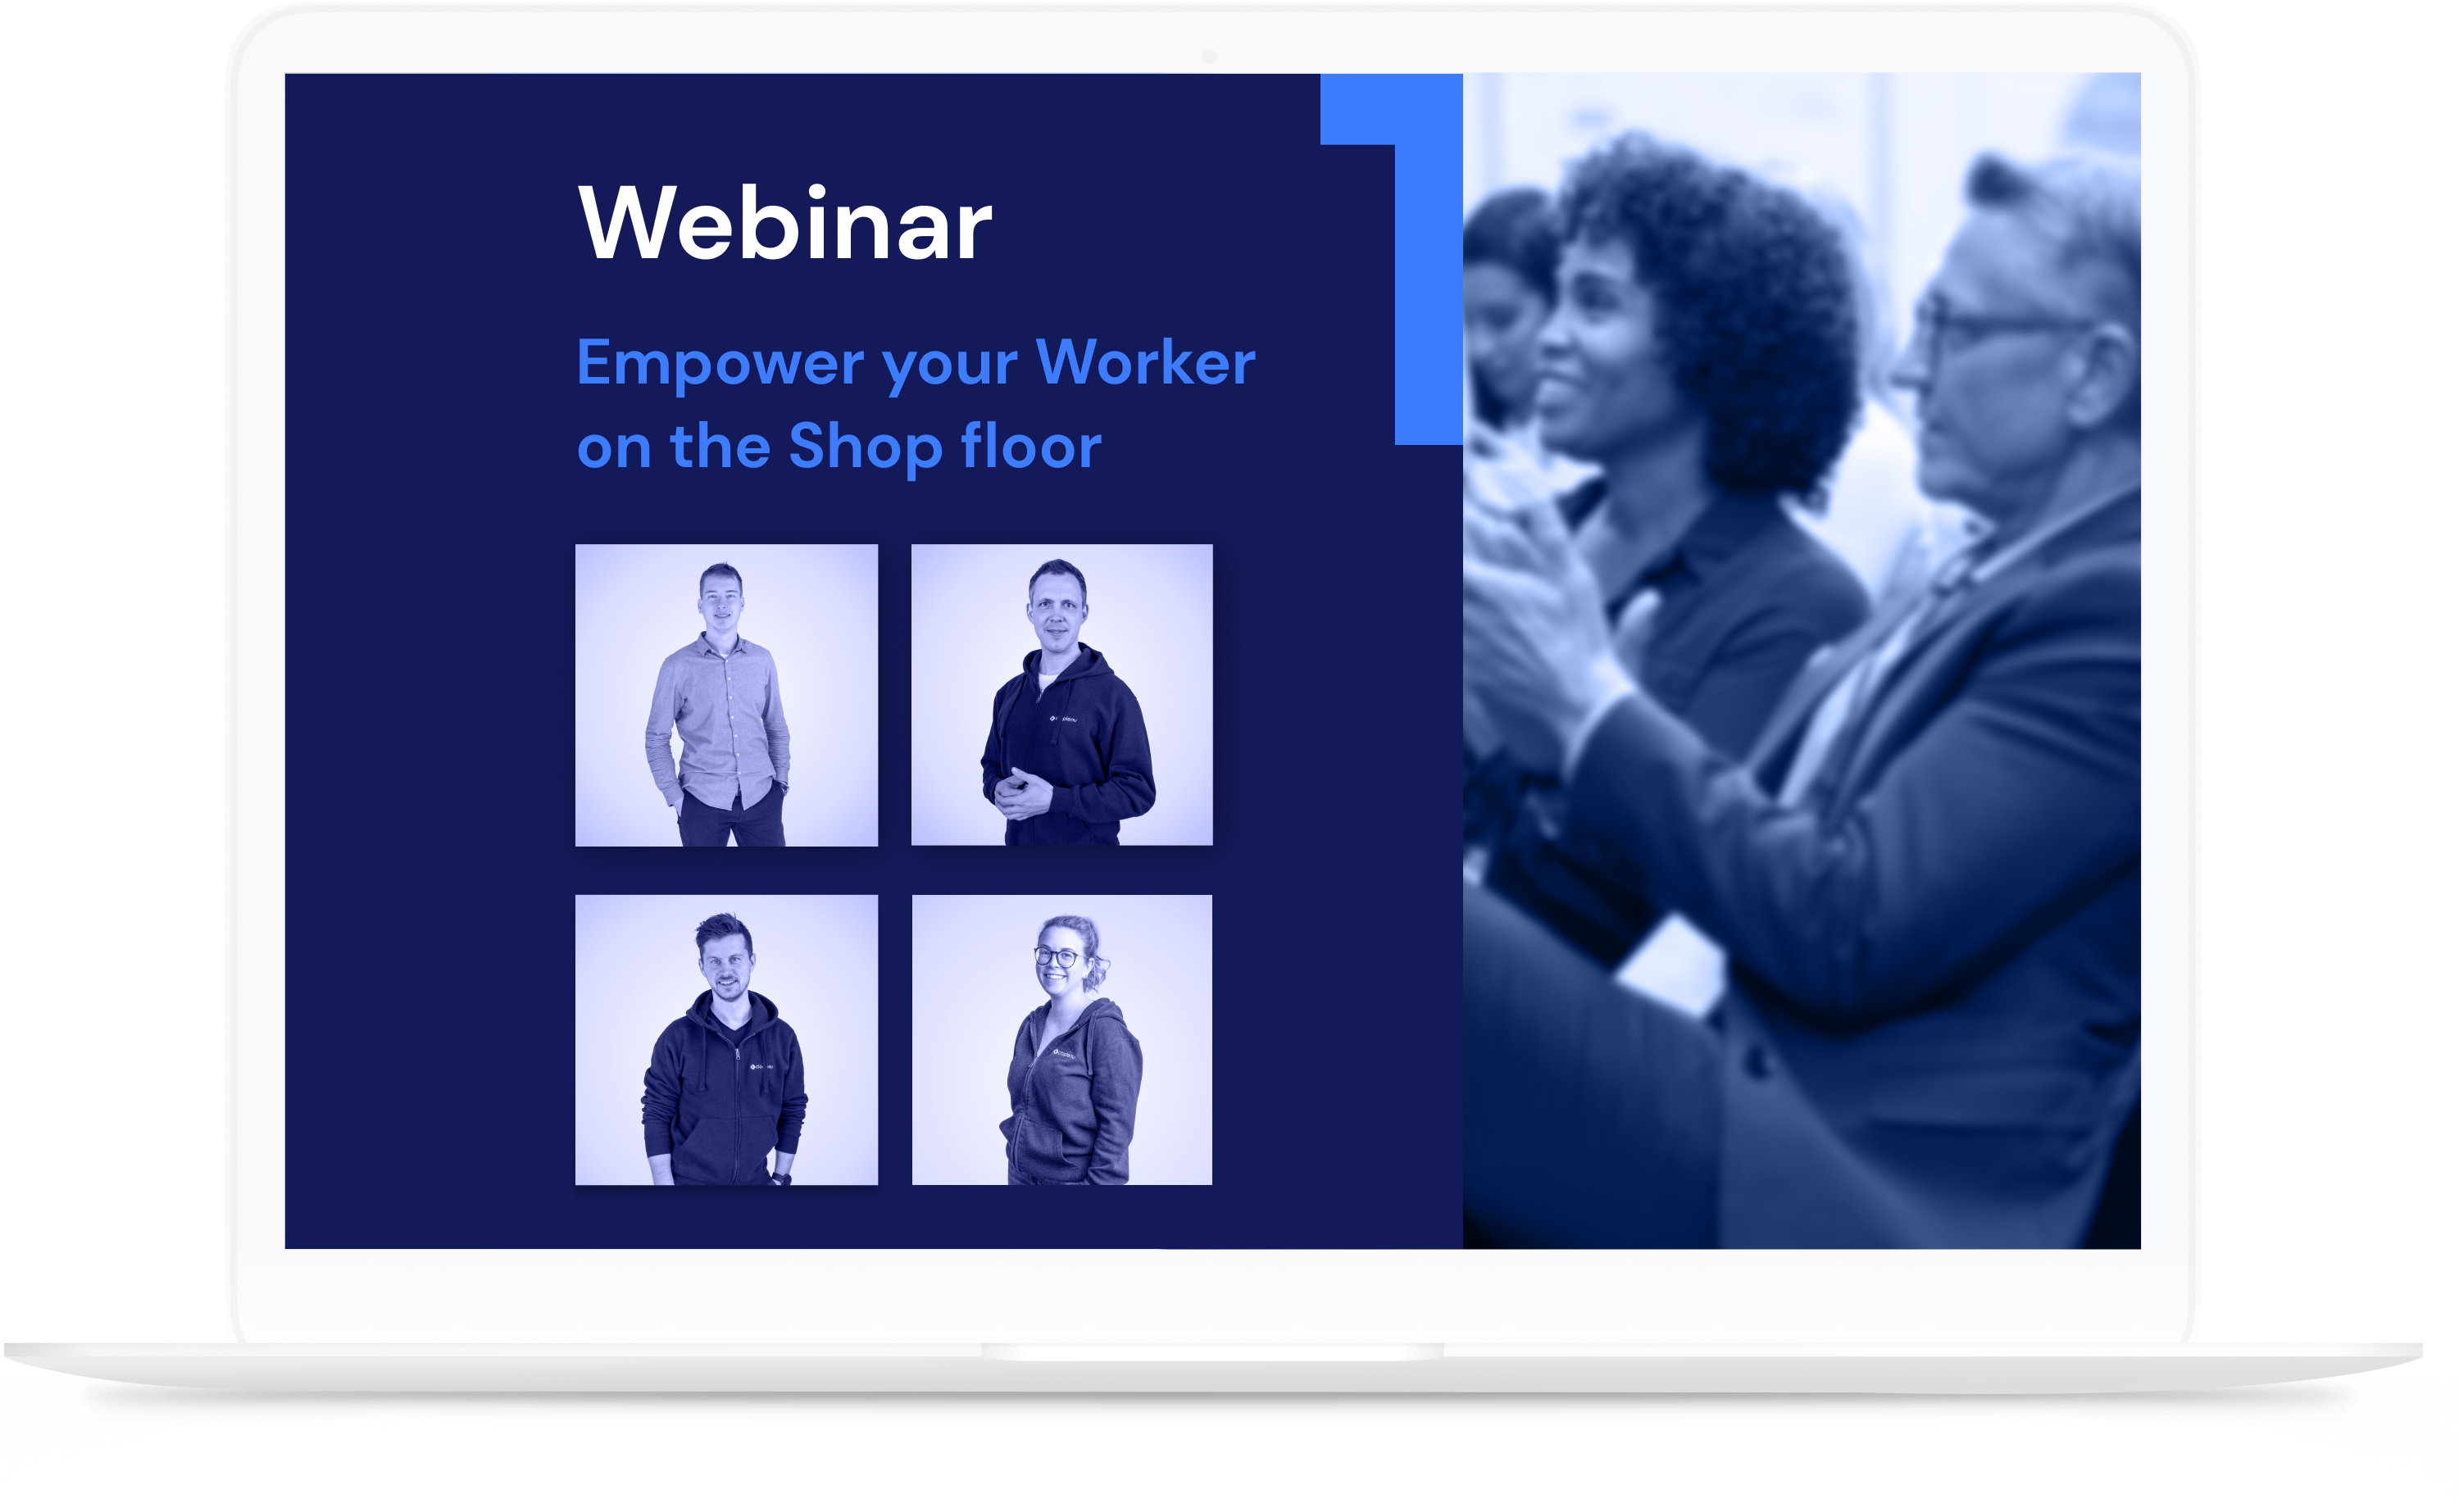 Webinar_Empower_your_Worker_on_the_Shop_floor_mit_Operations1